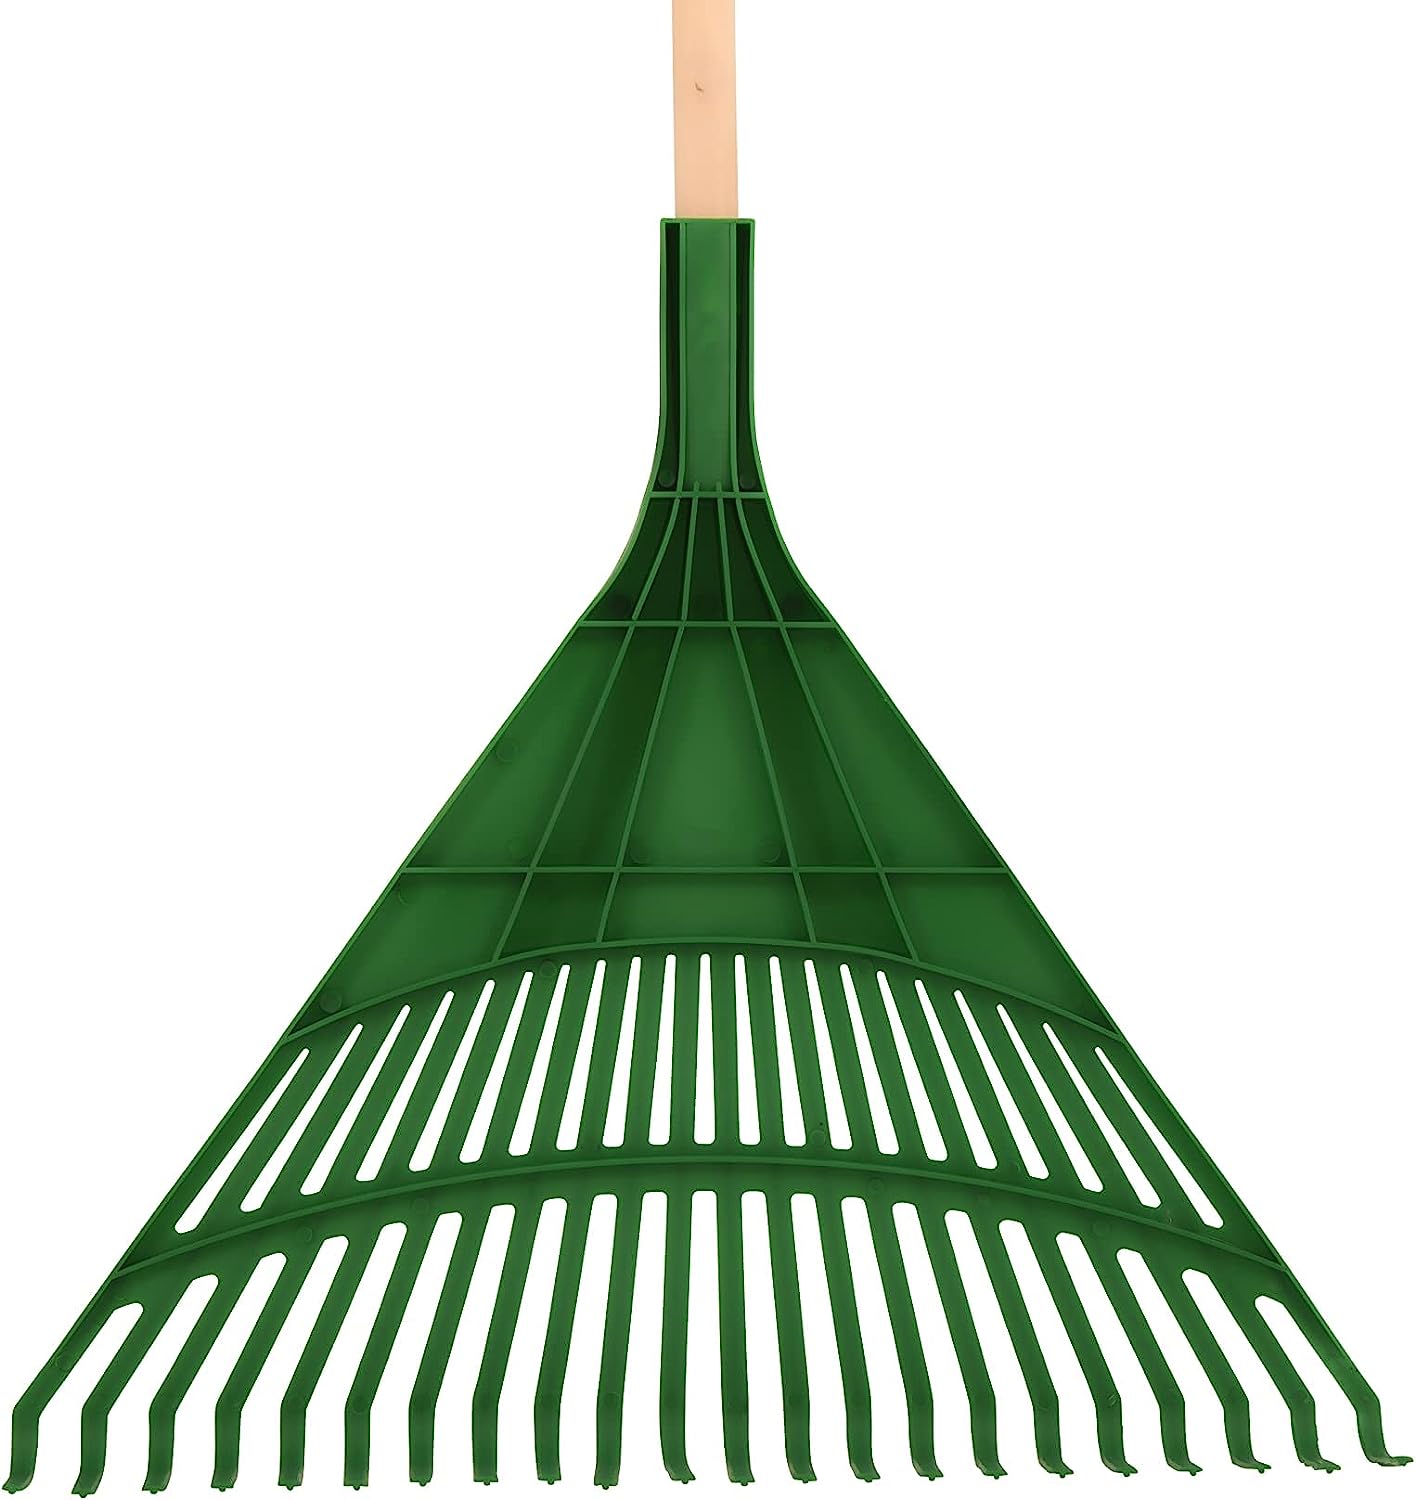 Green Rake with 48" Wooden Handle.